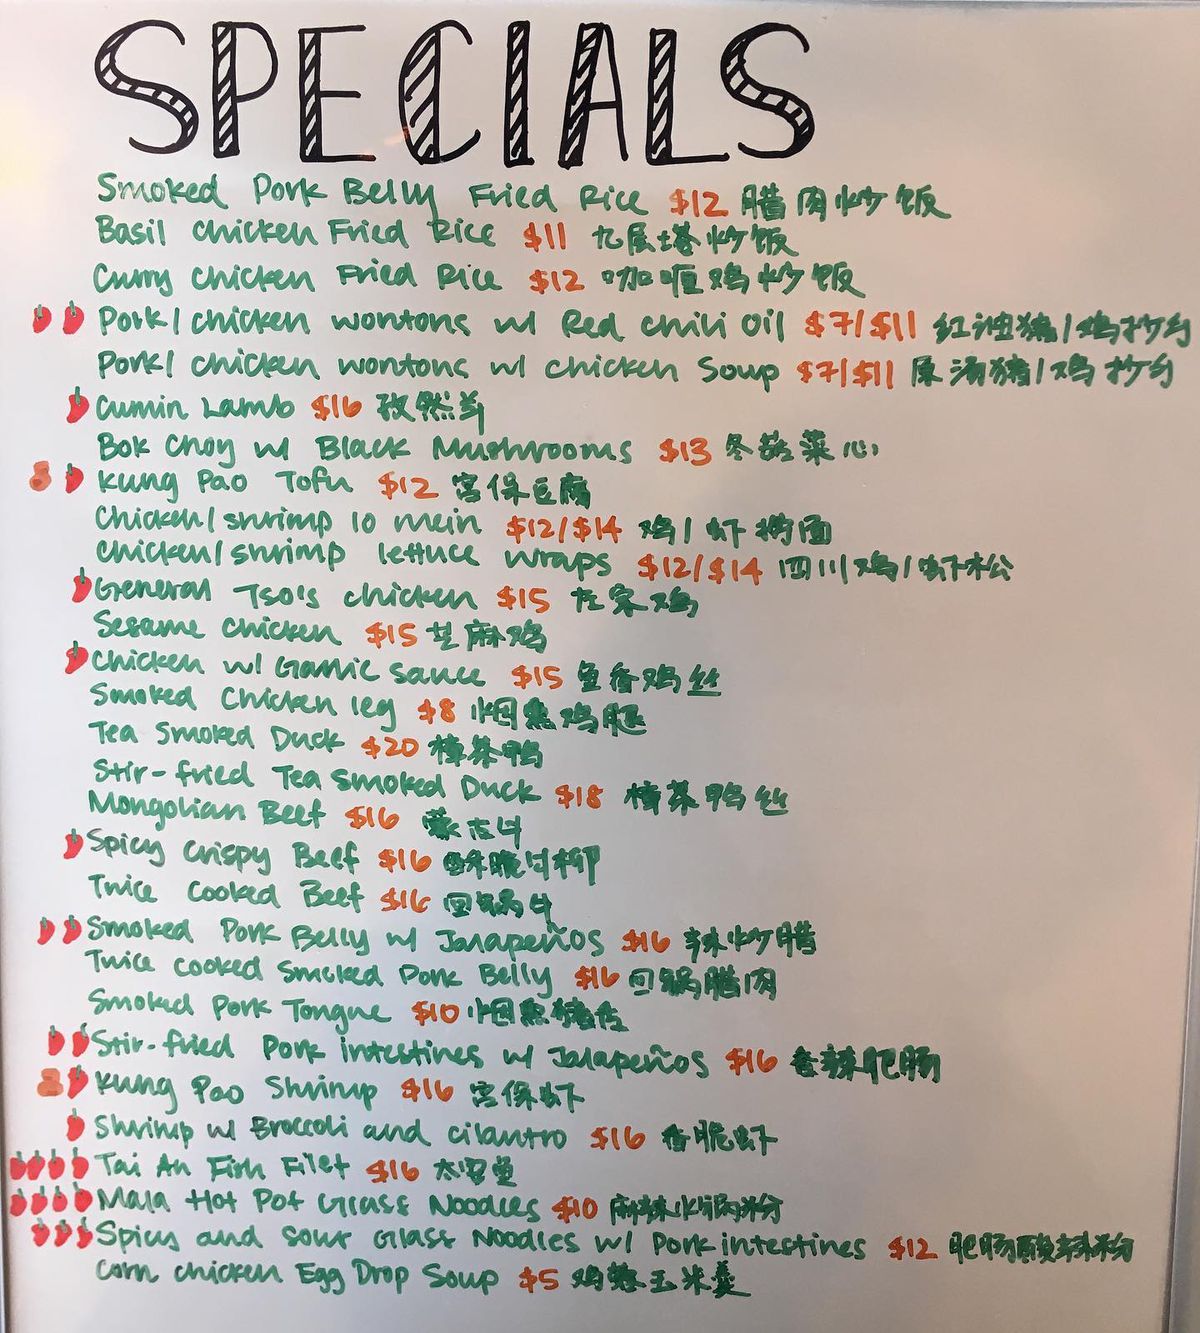 The specials menu including several Gu’s Bistro favorites like tea smoked duck, smoked pork tongue, and kung pao chicken